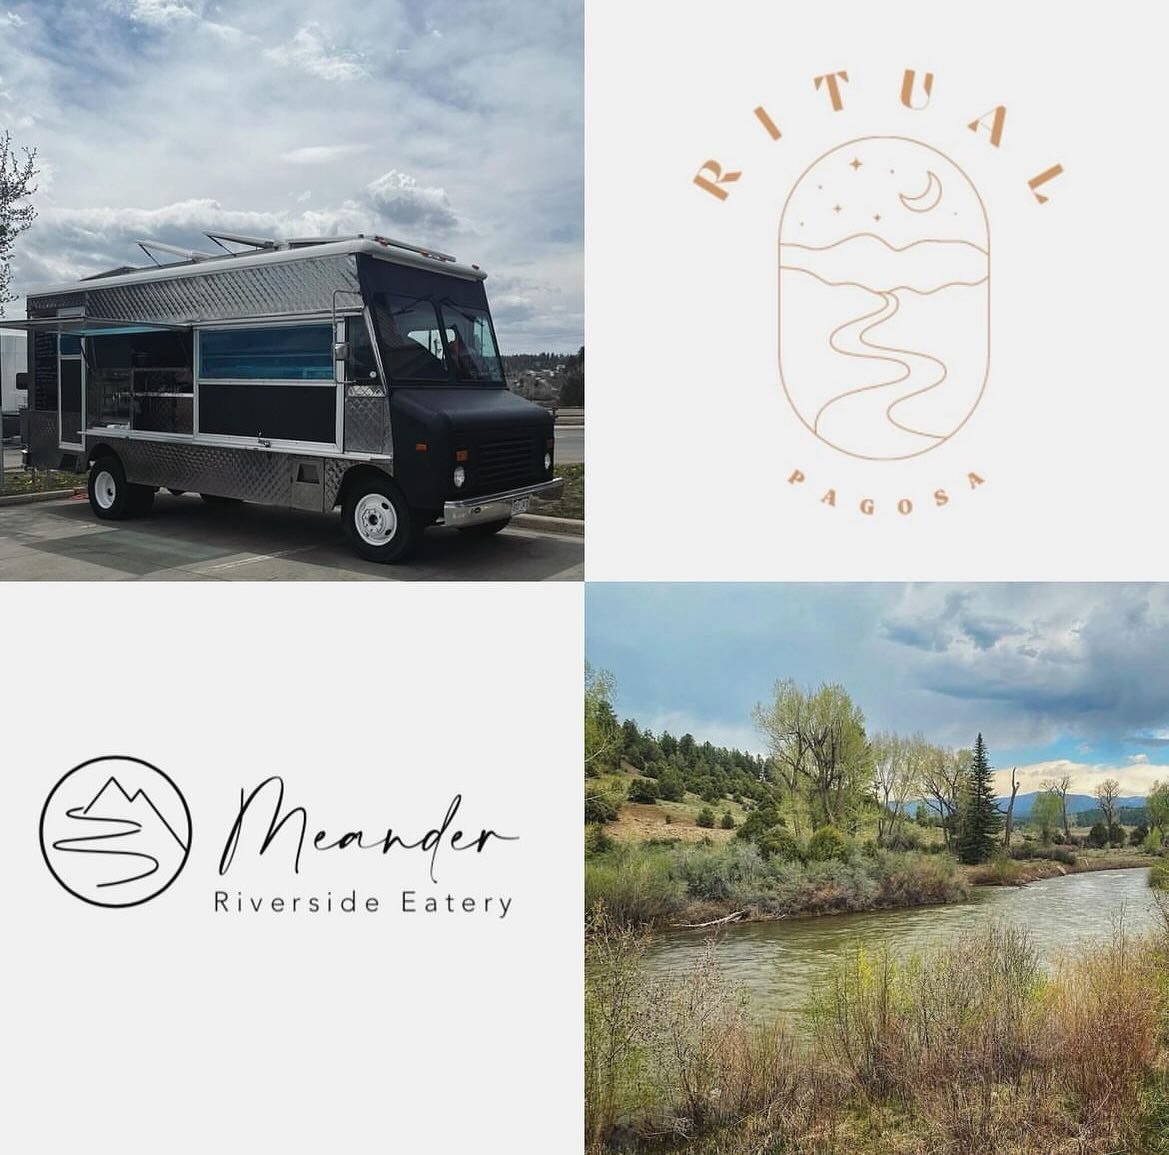 IT&rsquo;S OPENING DAY! 🎉

@ritualpagosa will be serving their delicious rotating menu right here at Meander! We will be serving drinks and have riverside seating for the perfect lunch stop. 

Join us 11am-4pm every day that Meander is open 🙌🏼
.
.